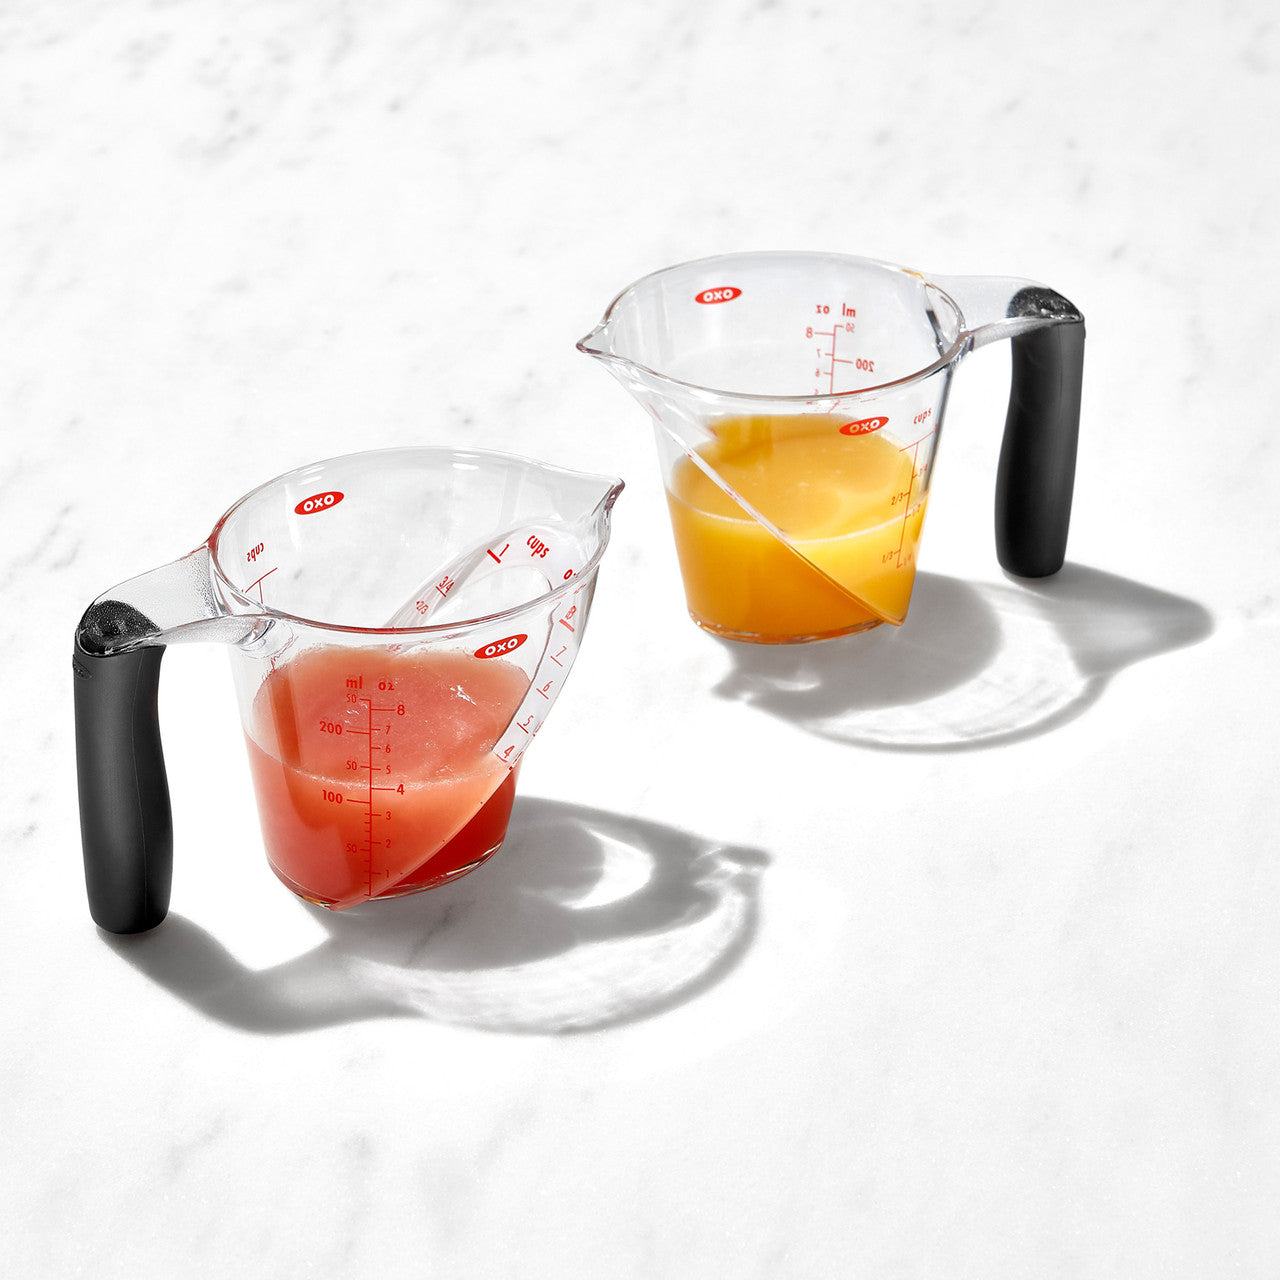 Angled Measure Cup - 4 CUP/ 1L